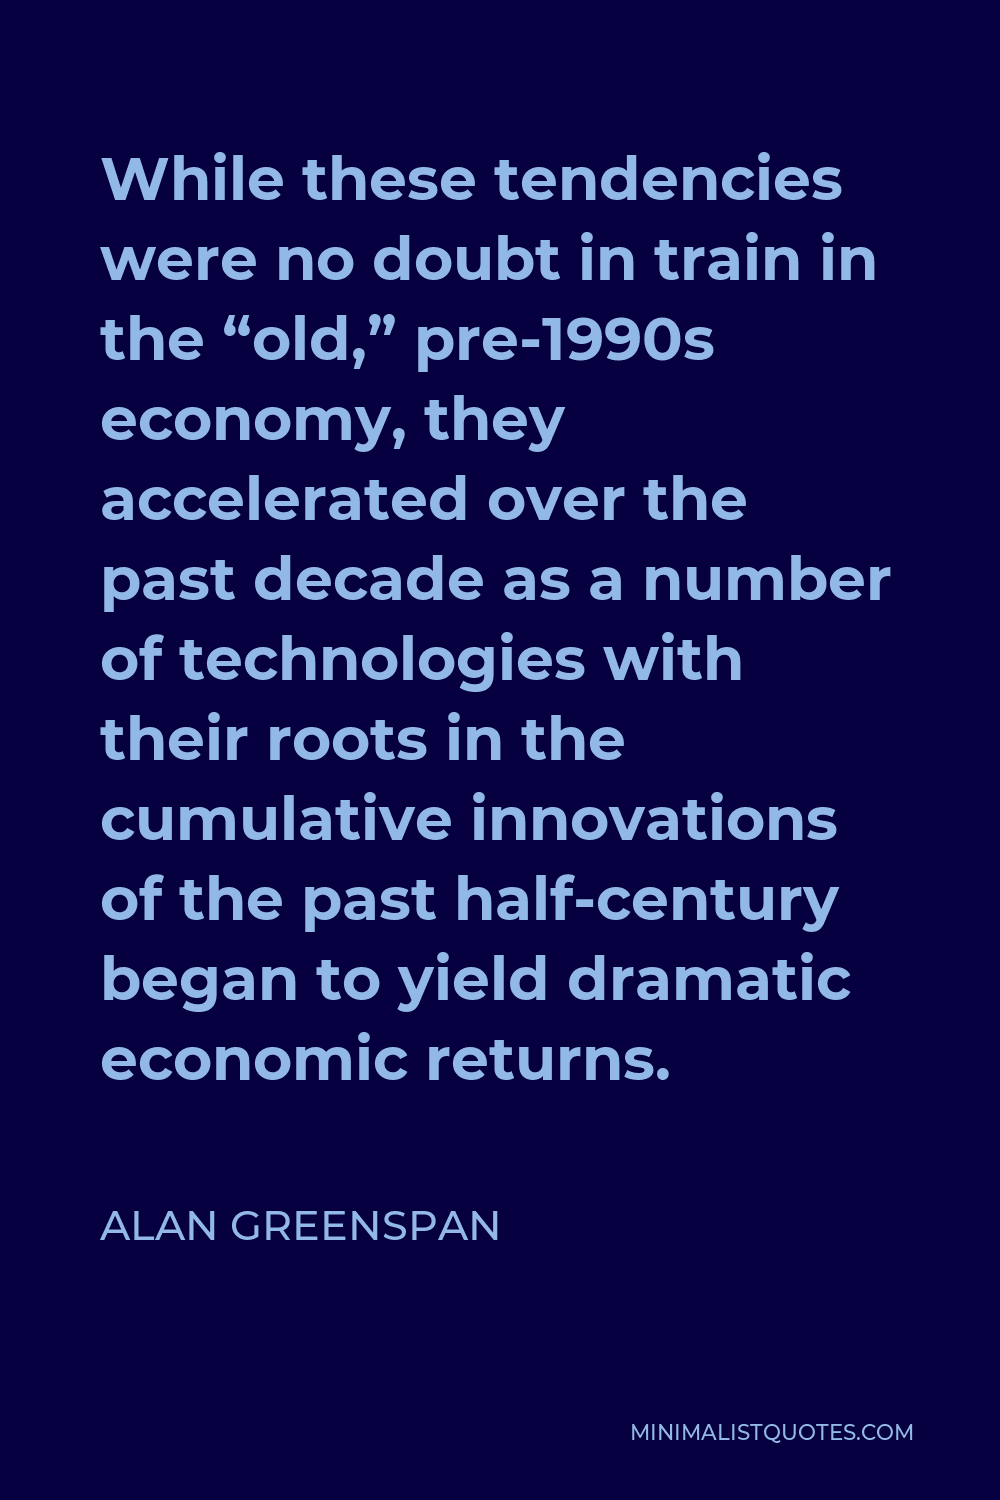 Alan Greenspan Quote - While these tendencies were no doubt in train in the “old,” pre-1990s economy, they accelerated over the past decade as a number of technologies with their roots in the cumulative innovations of the past half-century began to yield dramatic economic returns.